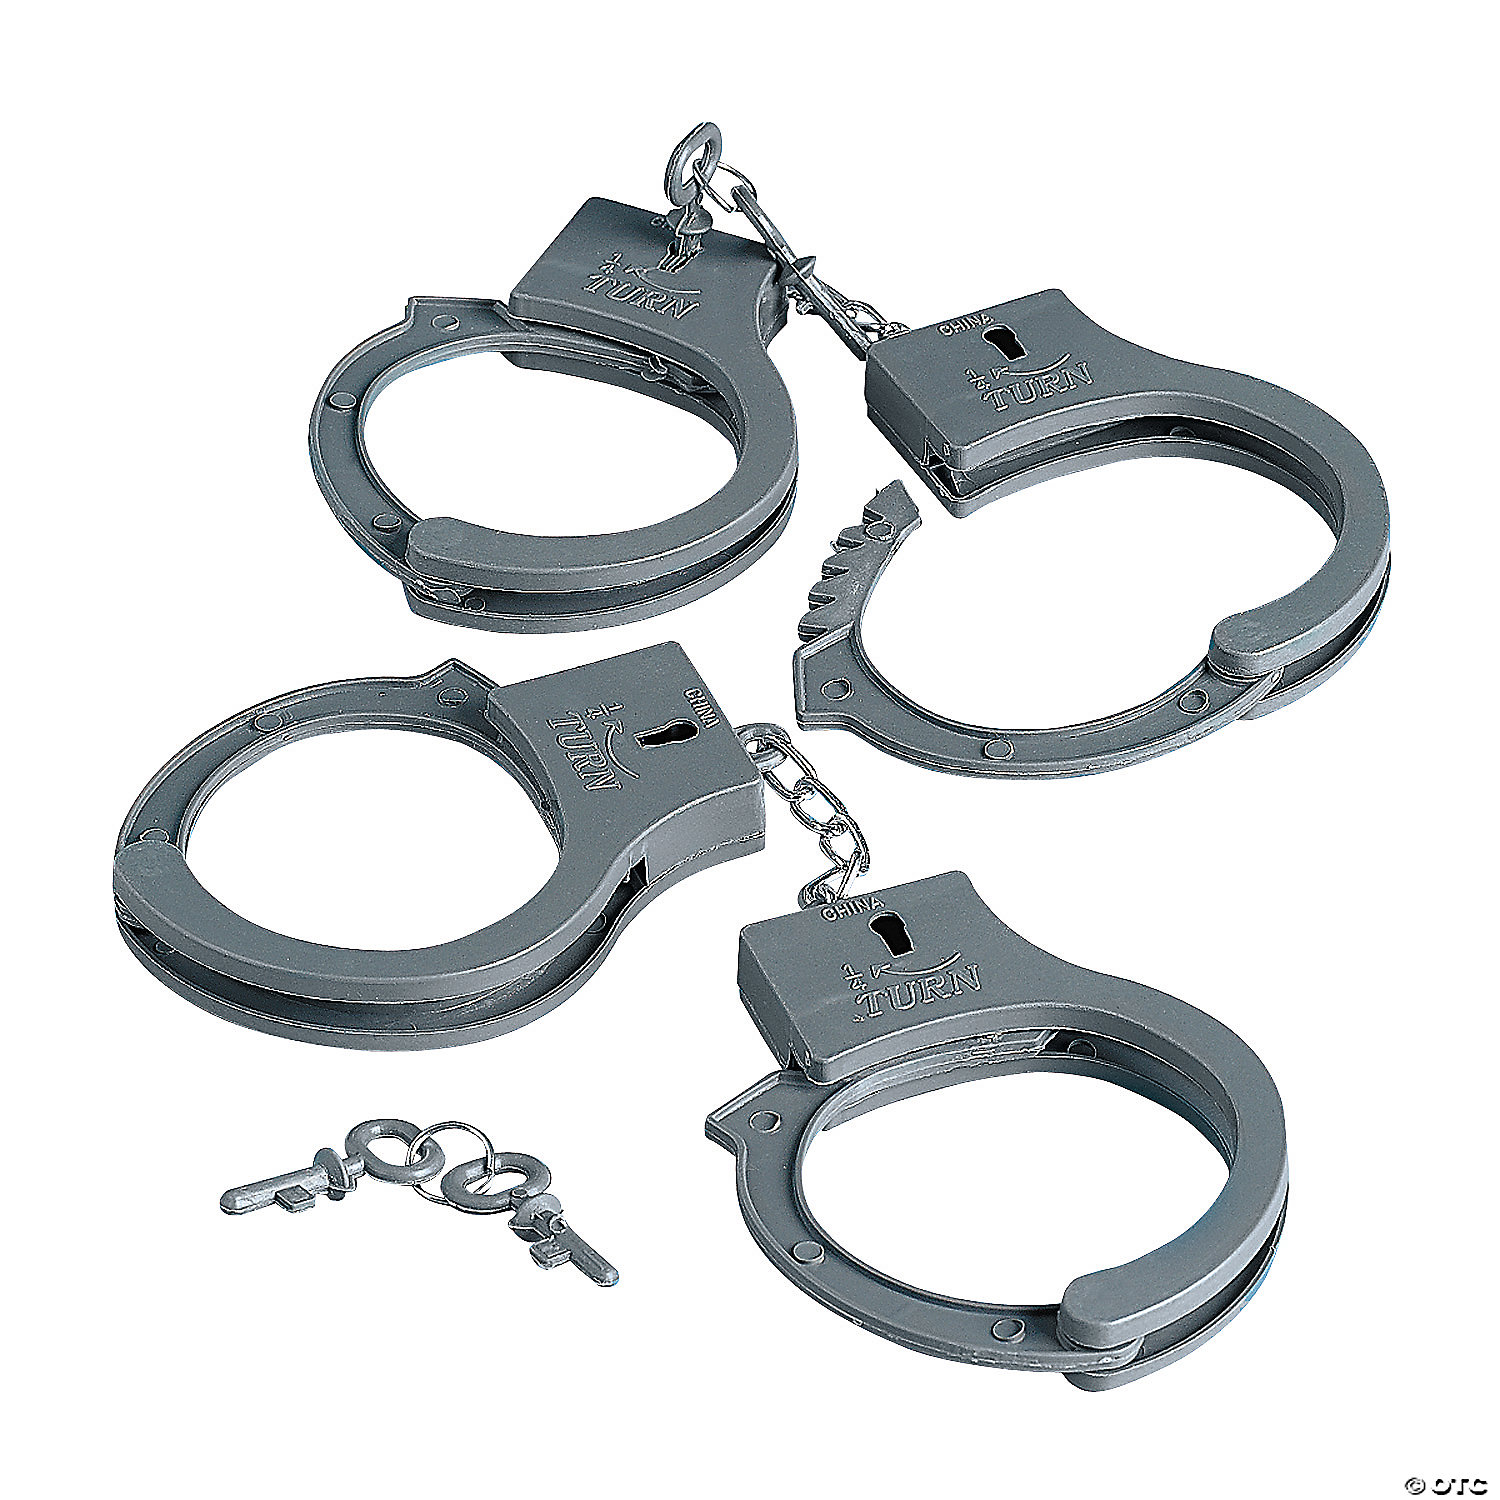 Real Working Handcuffs Costume Accessory with Keys 